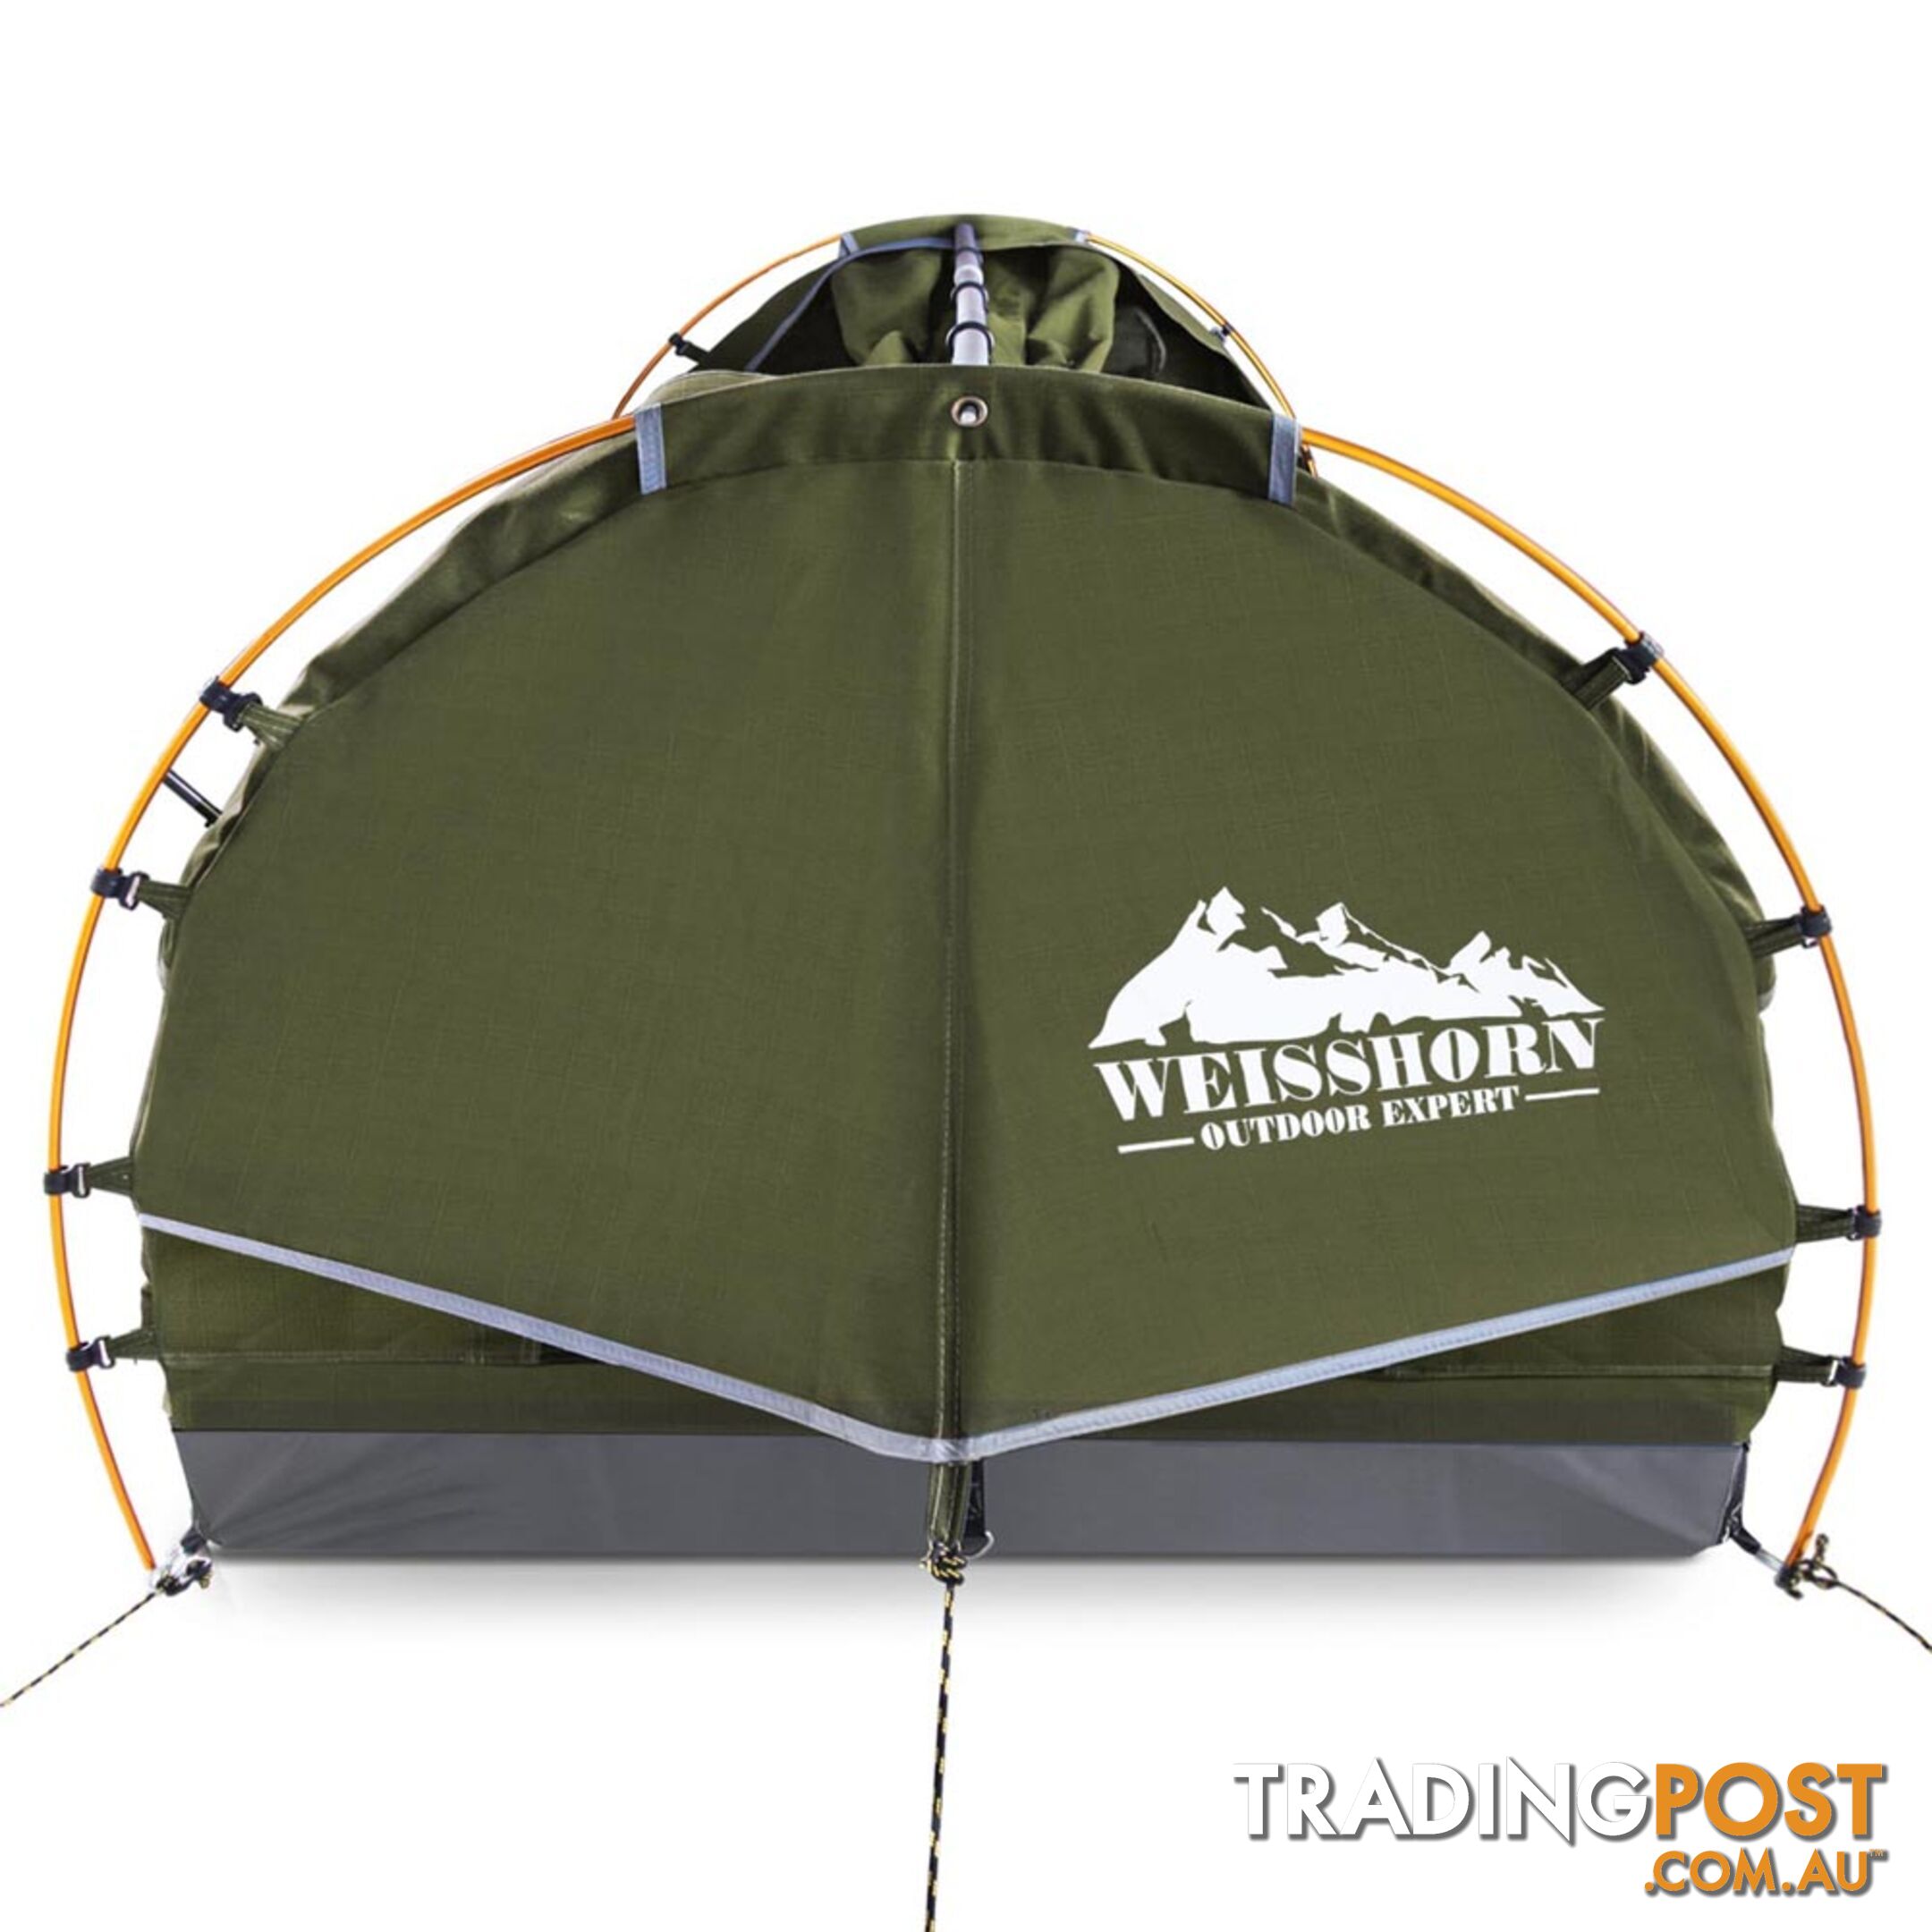 Free Standing Camping Canvas Swag Dome Tent 6cm Mattress Pillow Double Celadon